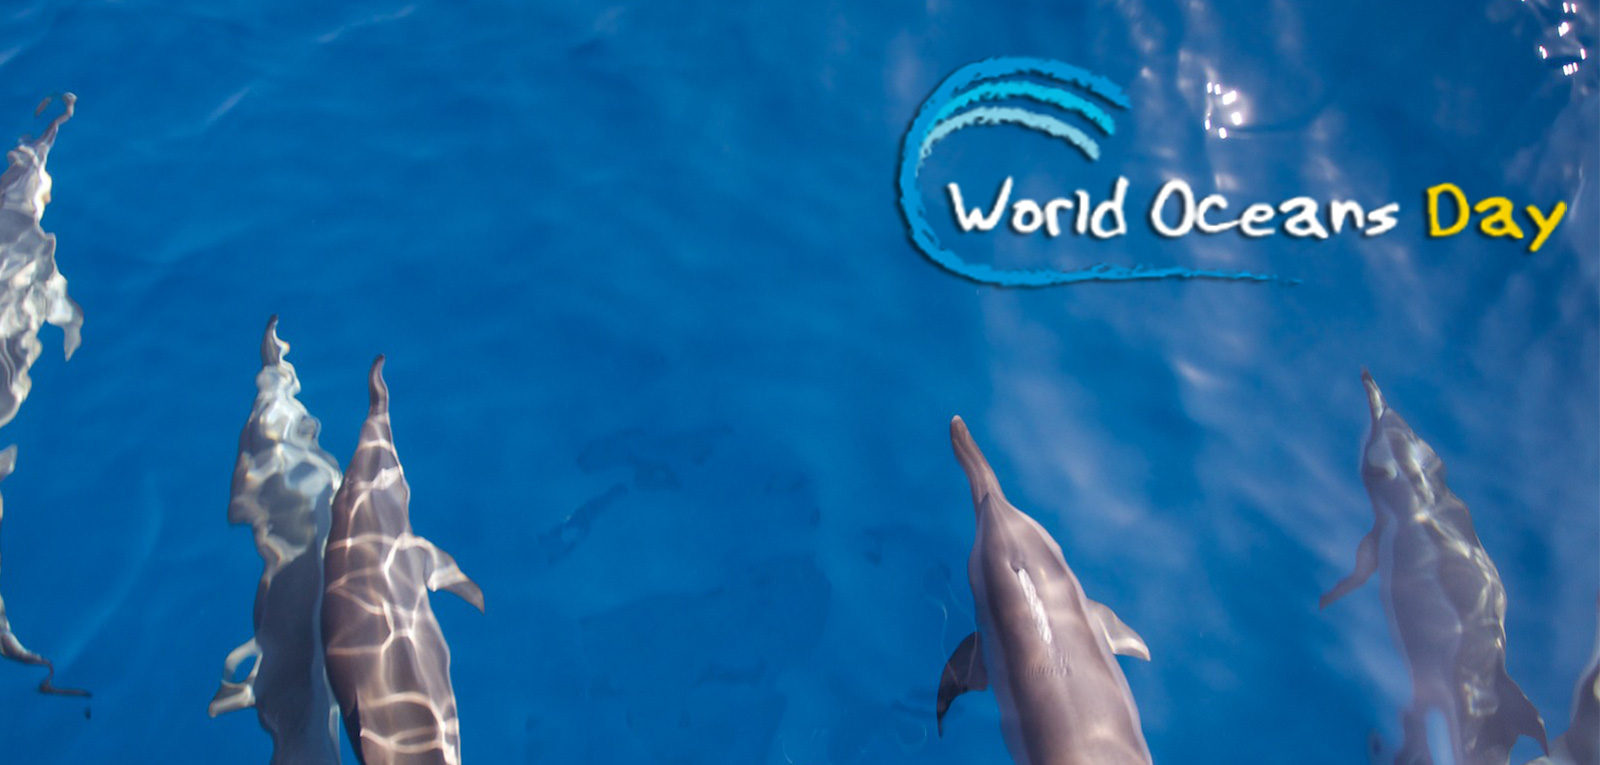 World Ocean Day Graphic Image